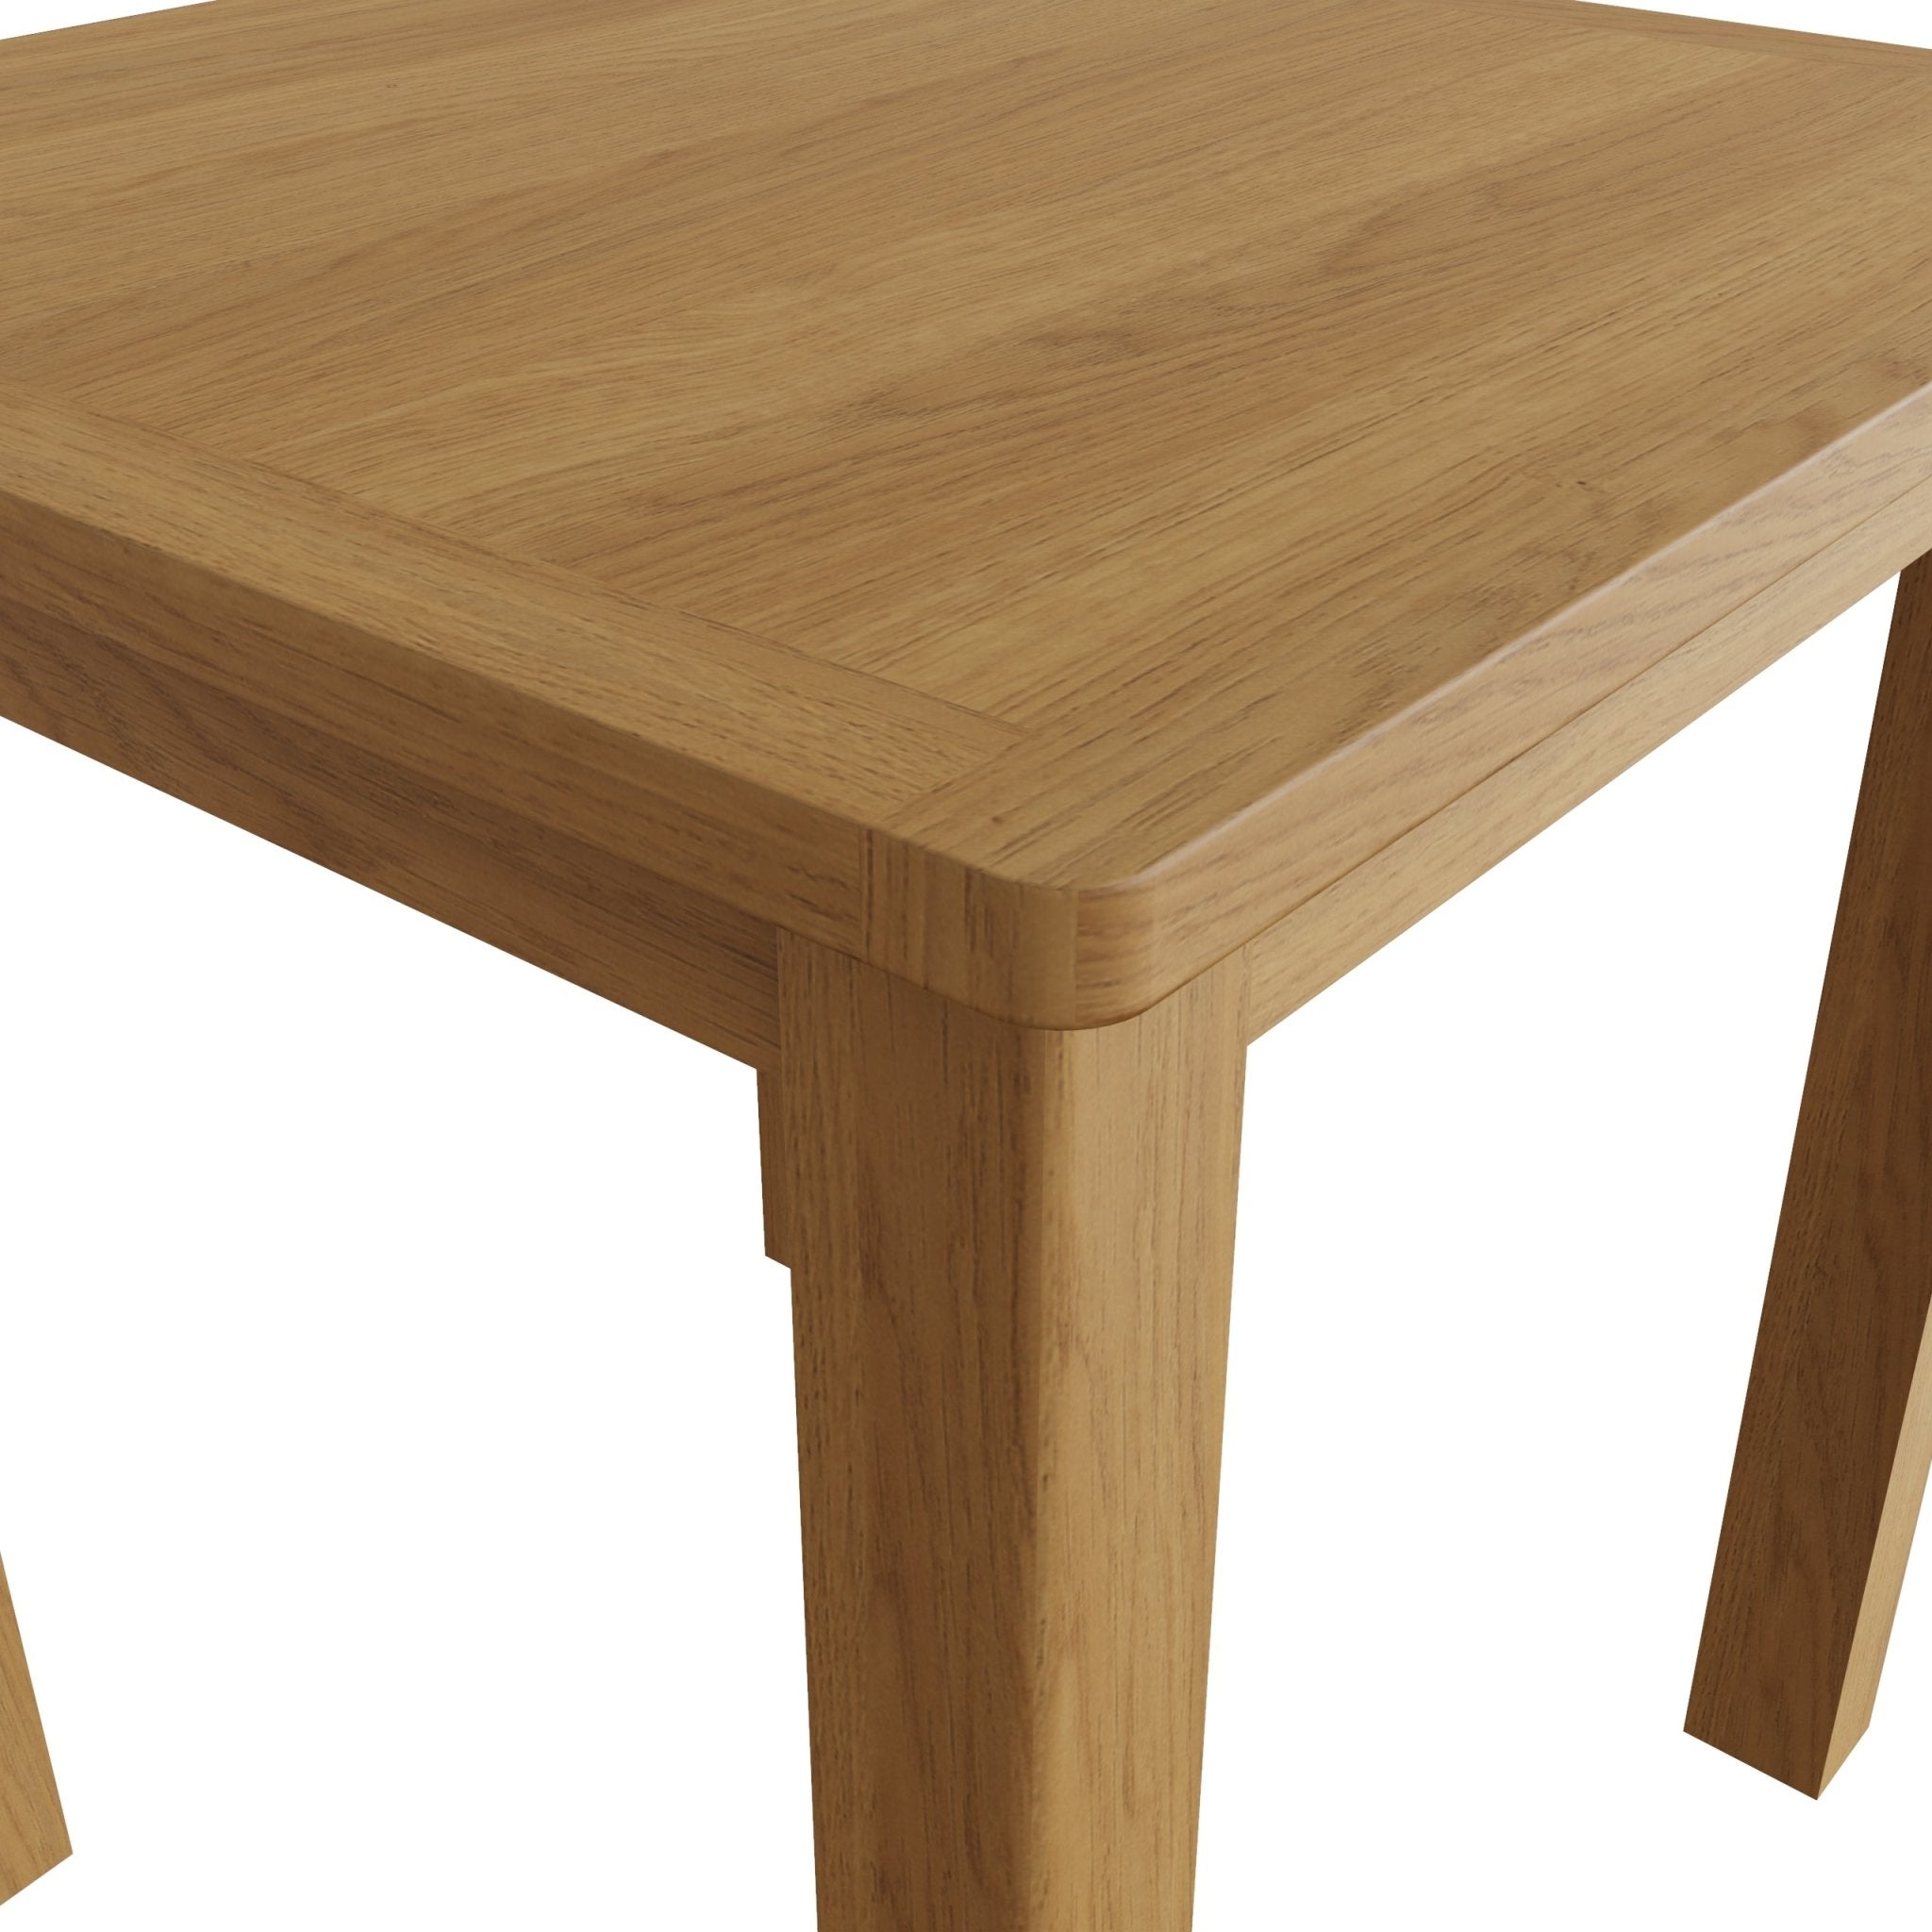 Loxwood Oak Fixed Top Dining Table - Duck Barn Interiors